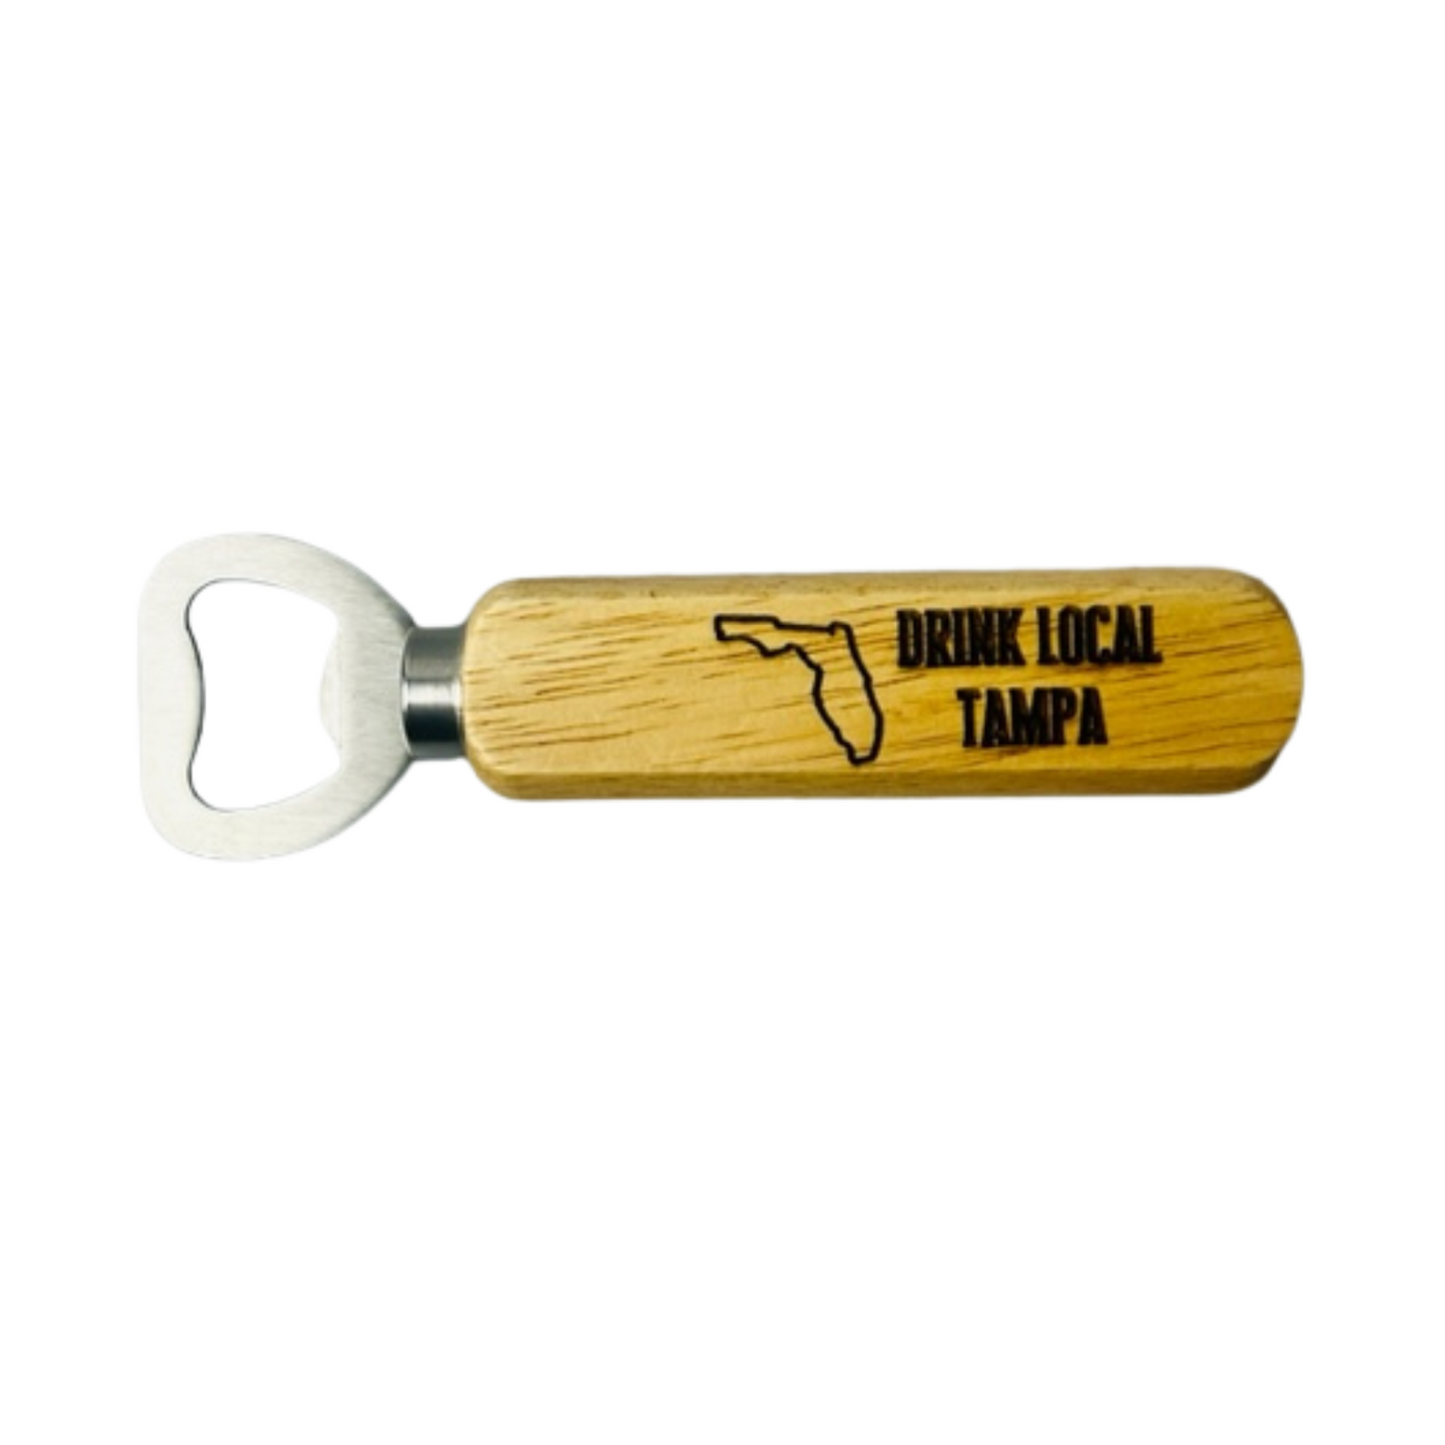 Drink Local Tampa Bottle Opener